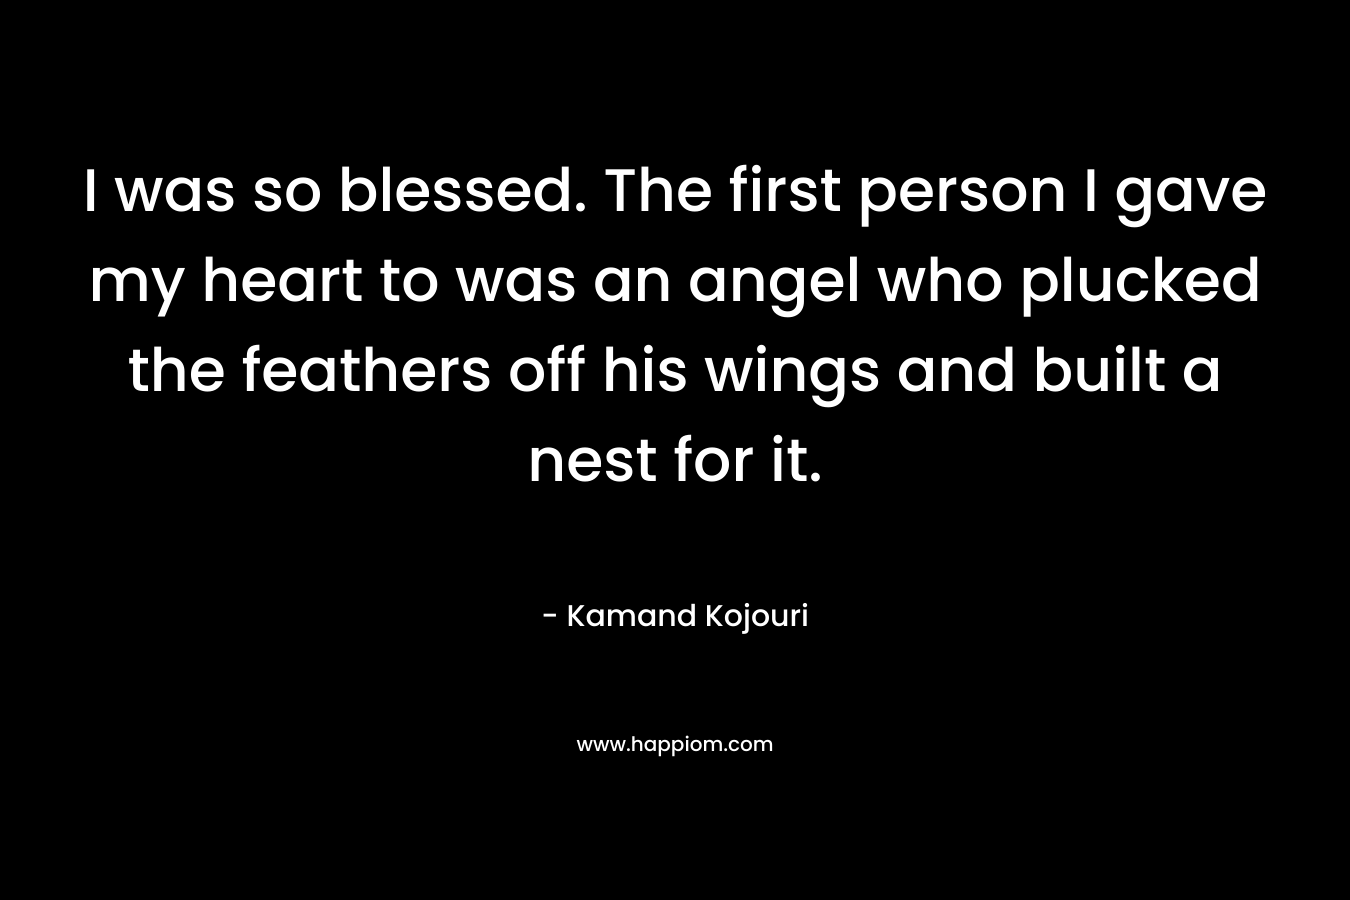 I was so blessed. The first person I gave my heart to was an angel who plucked the feathers off his wings and built a nest for it. – Kamand Kojouri